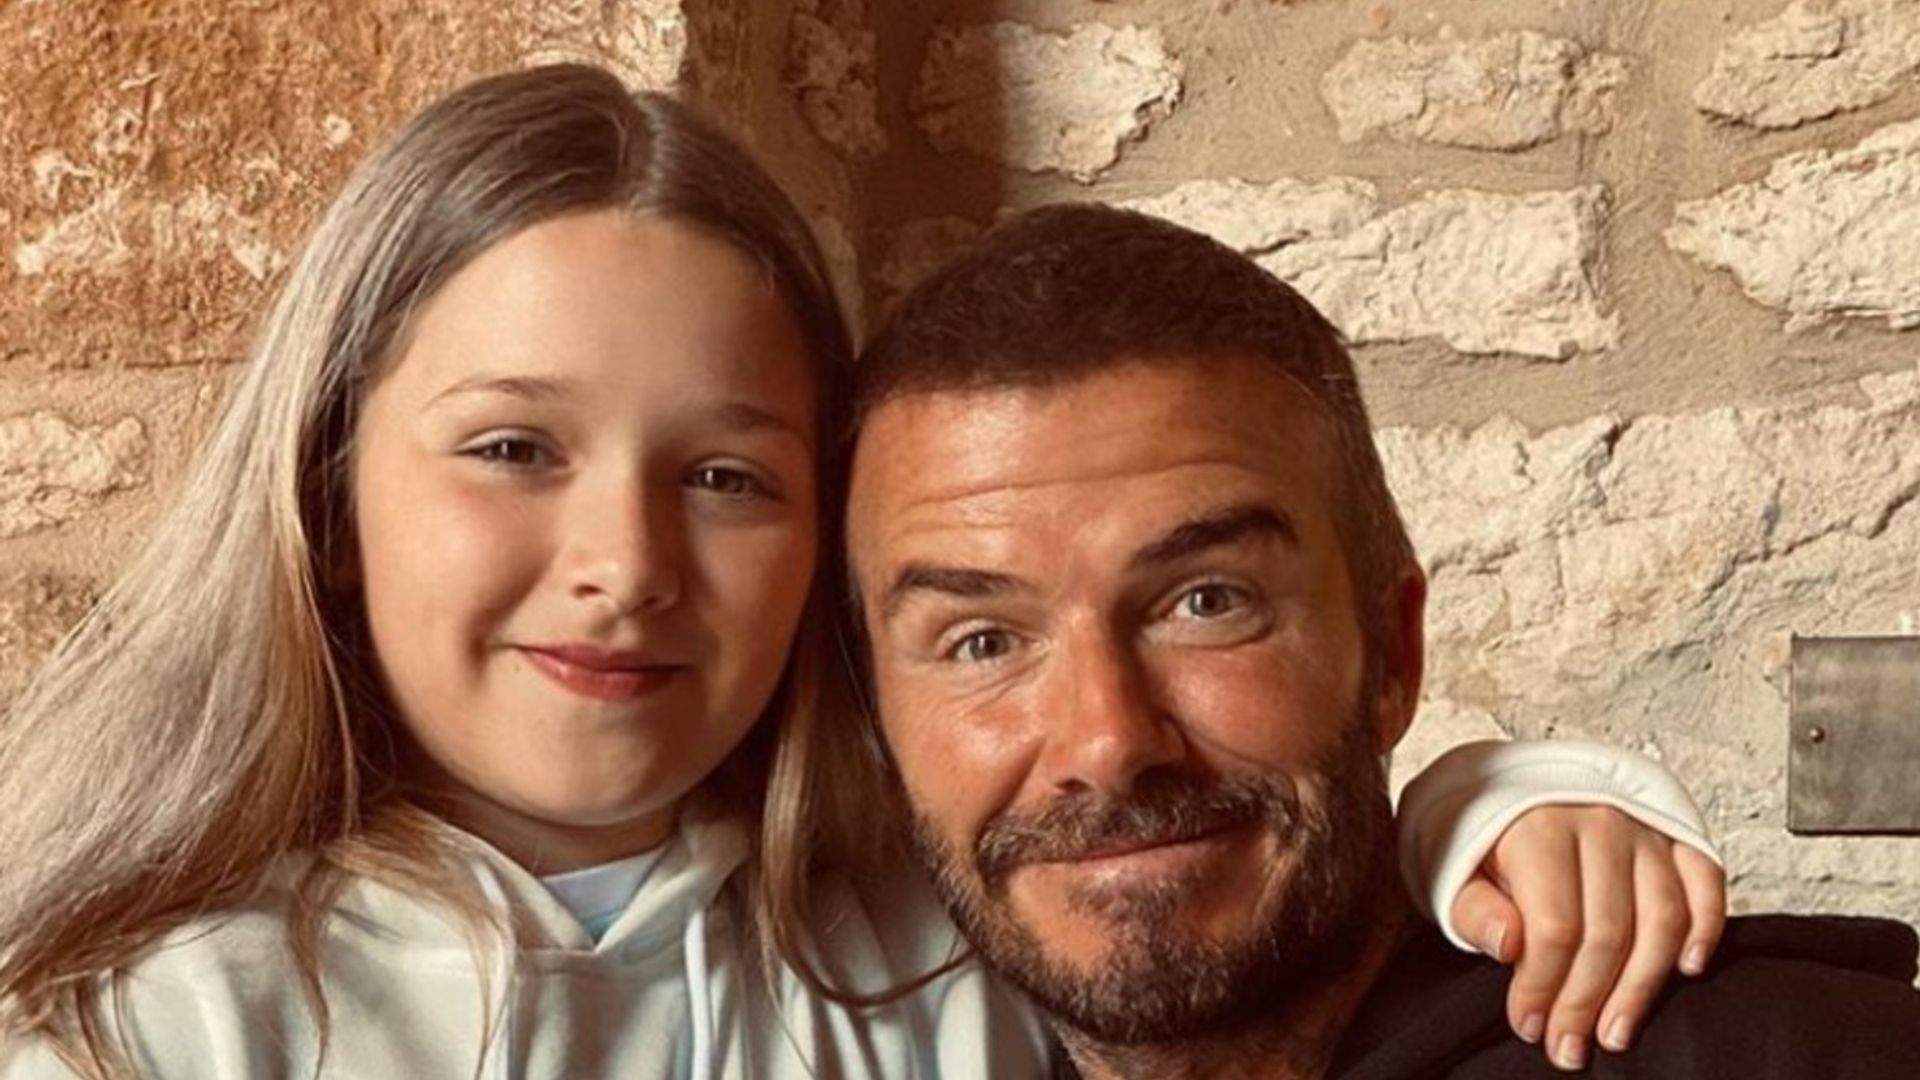 David Beckham and Harper reveal they are huge Friends fans in new photo